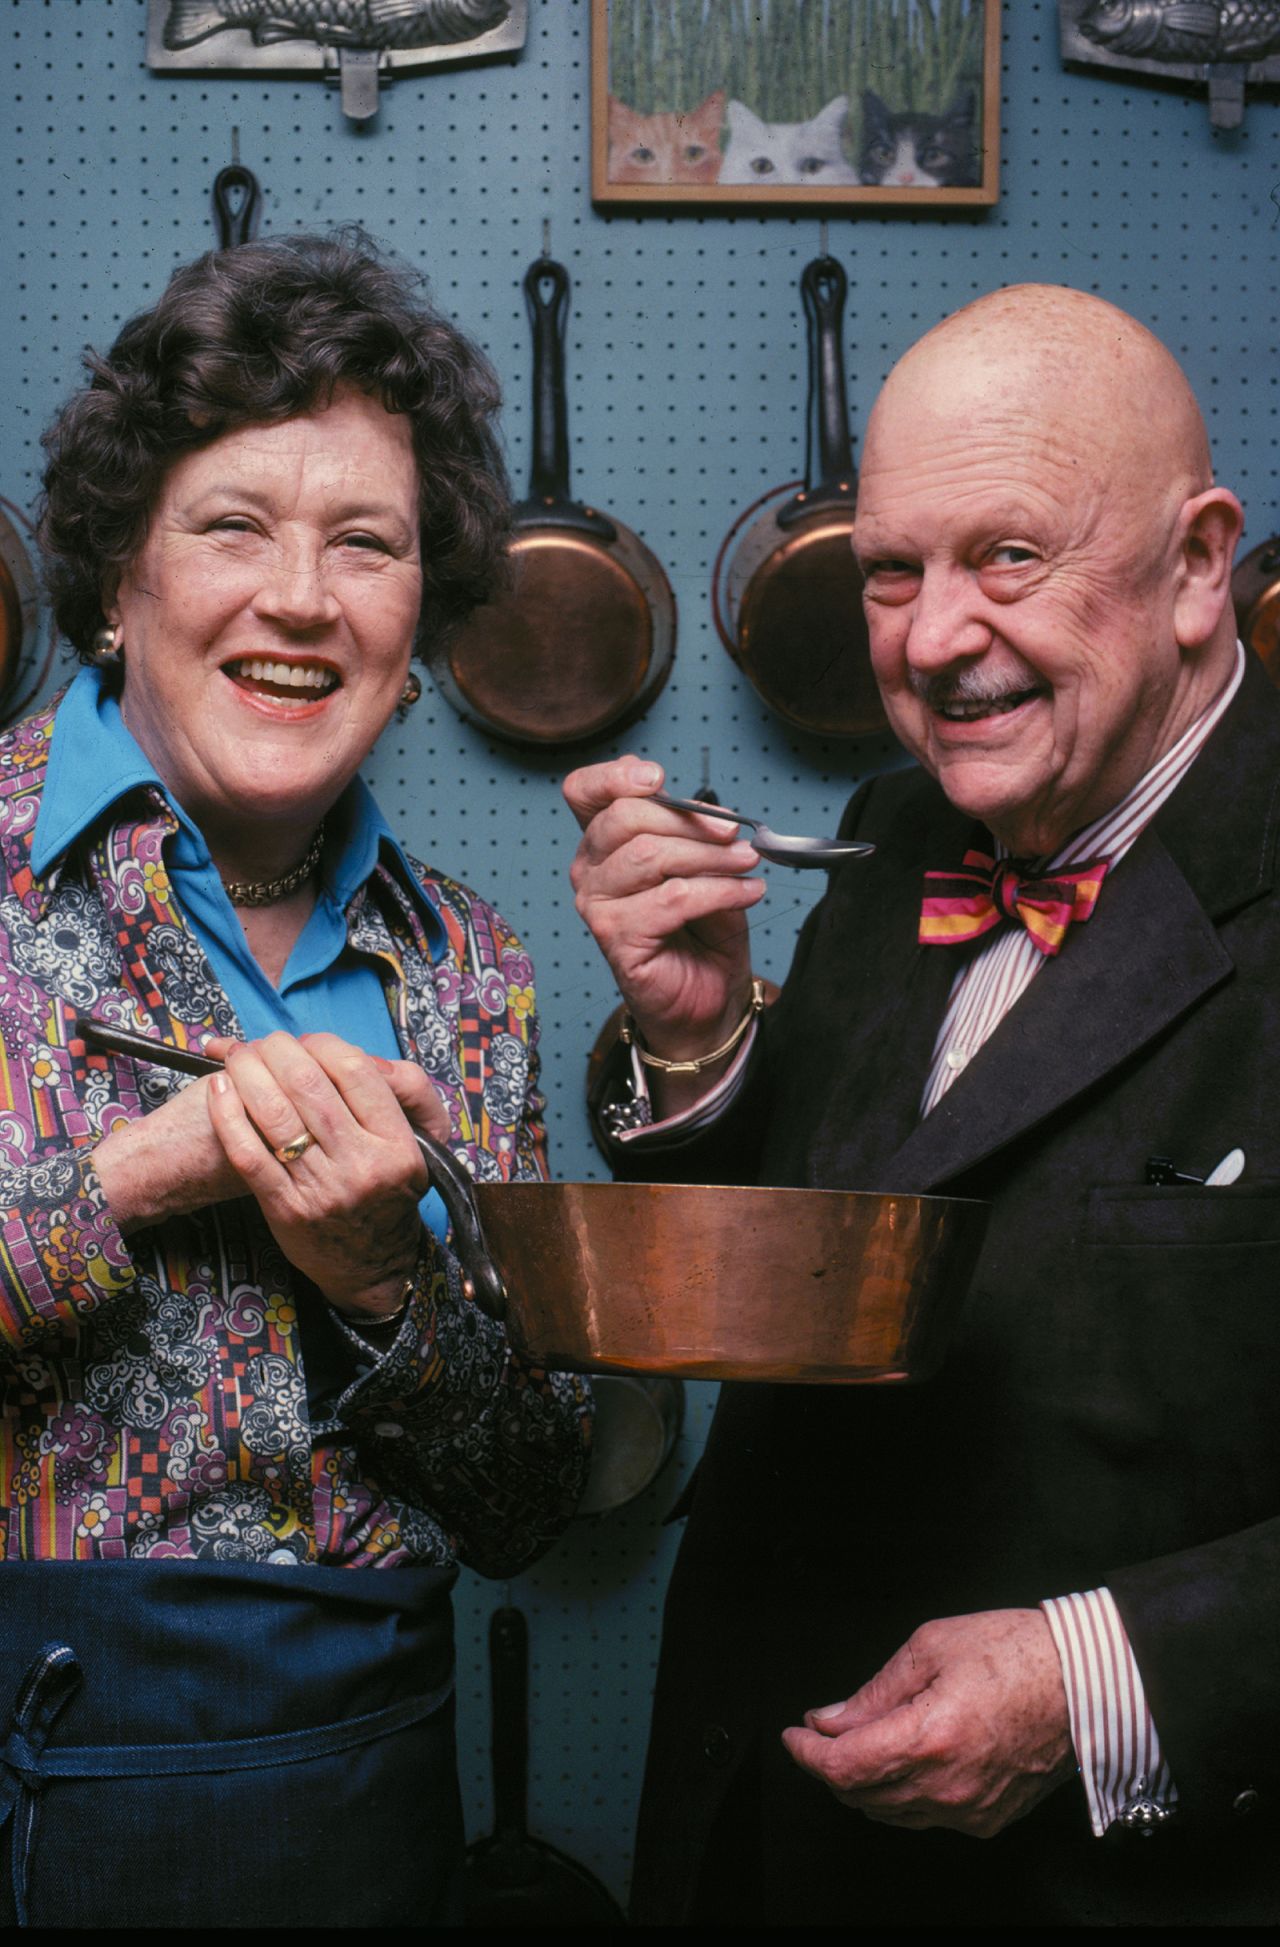 Child and renowned chef James Beard are photographed in Child's kitchen circa 1978. The pair were lifelong friends, meeting shortly after Child's first cookbook was published.